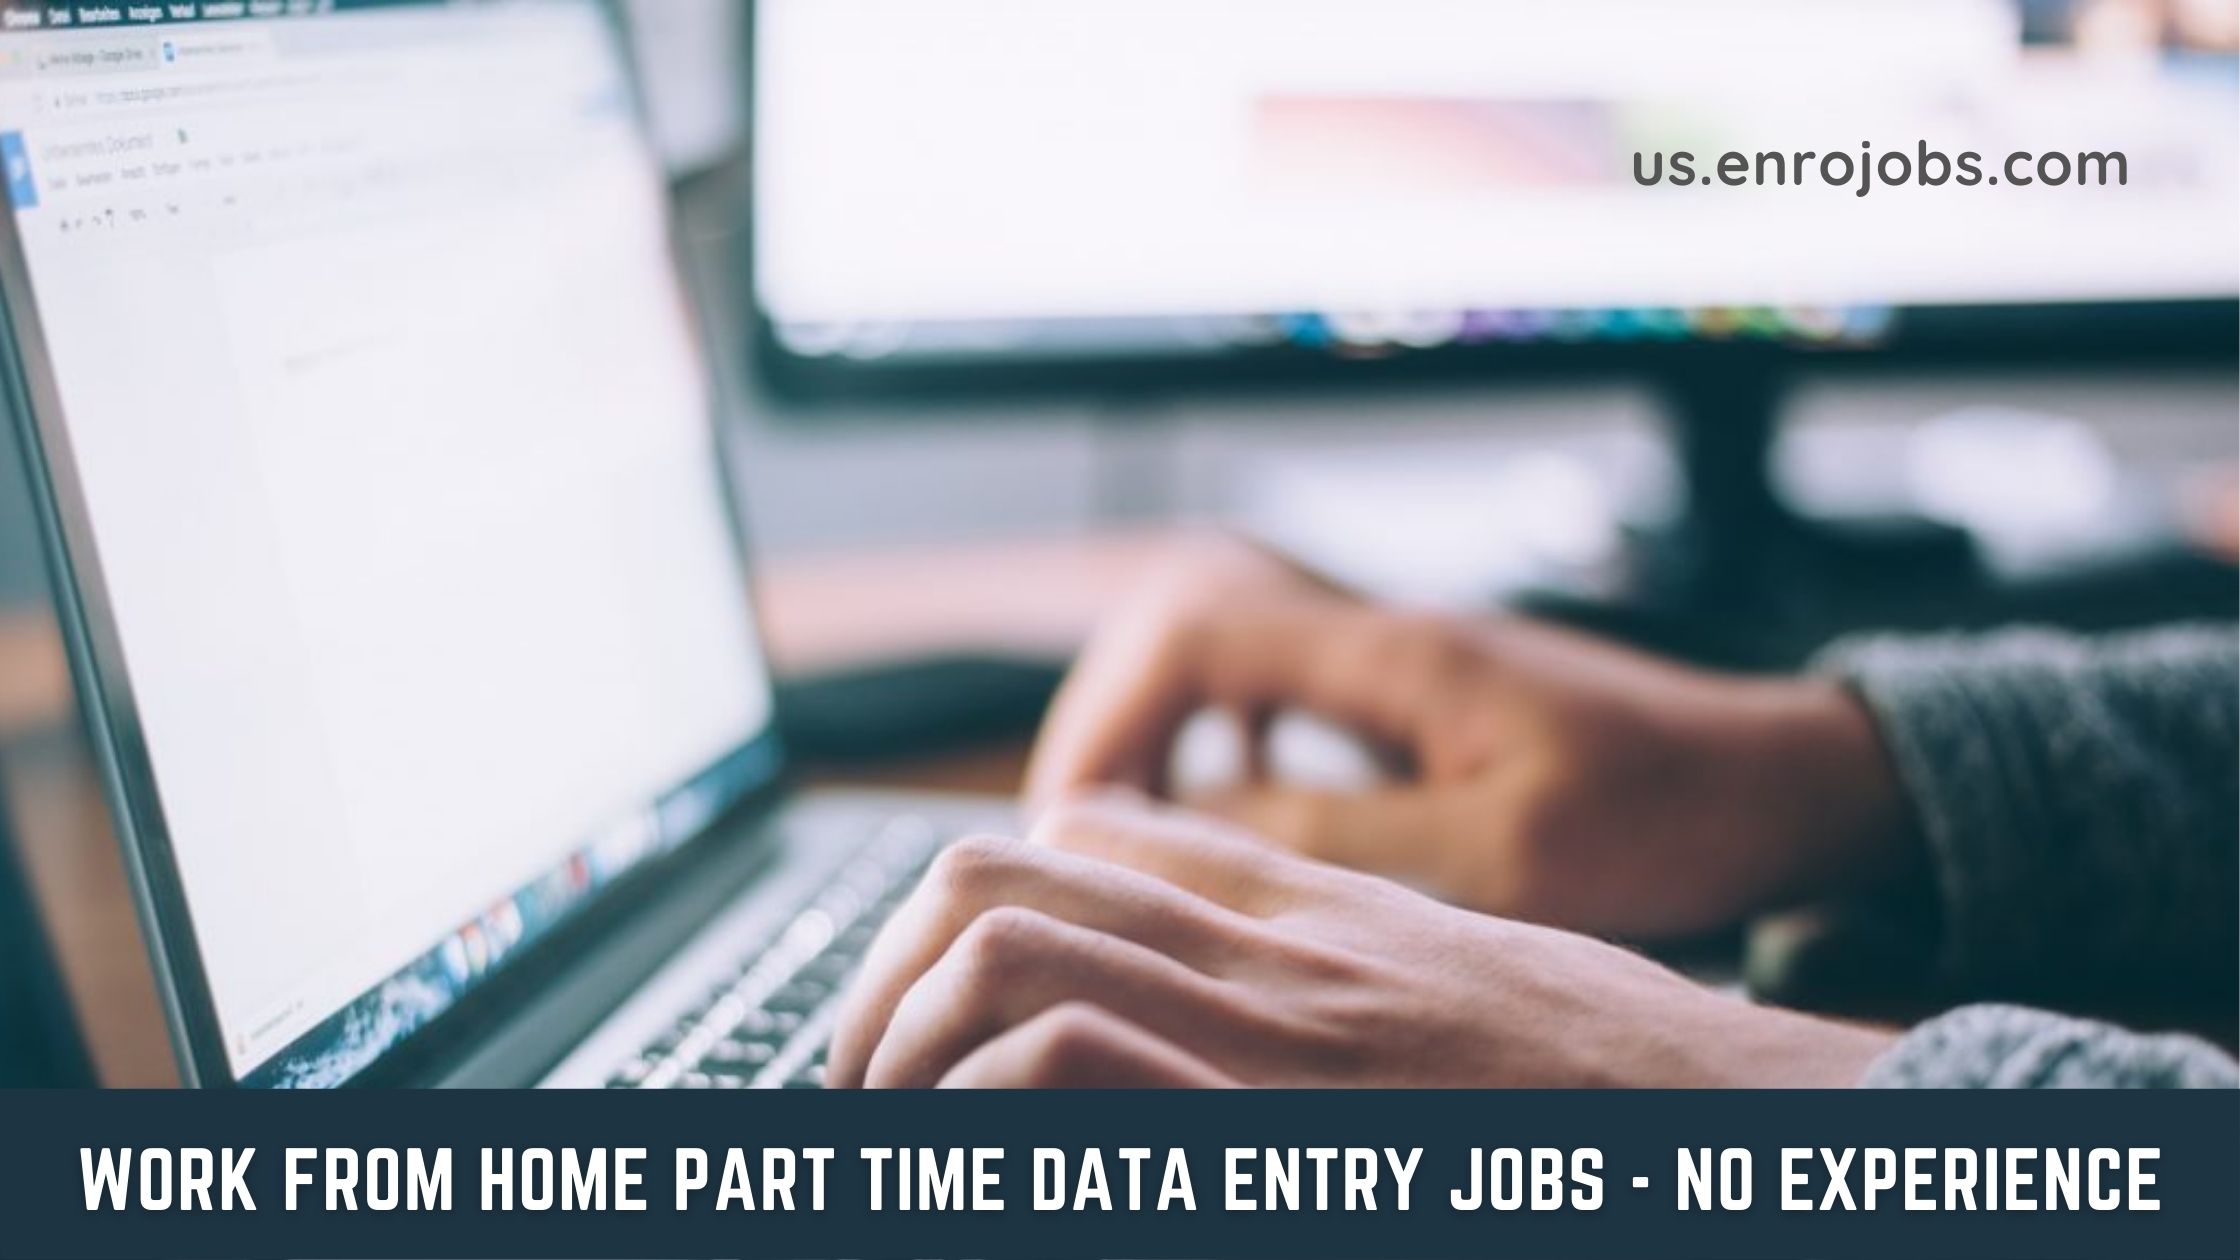 Remote Work from Home Online Computer Part Time Data Entry Jobs - No Experience